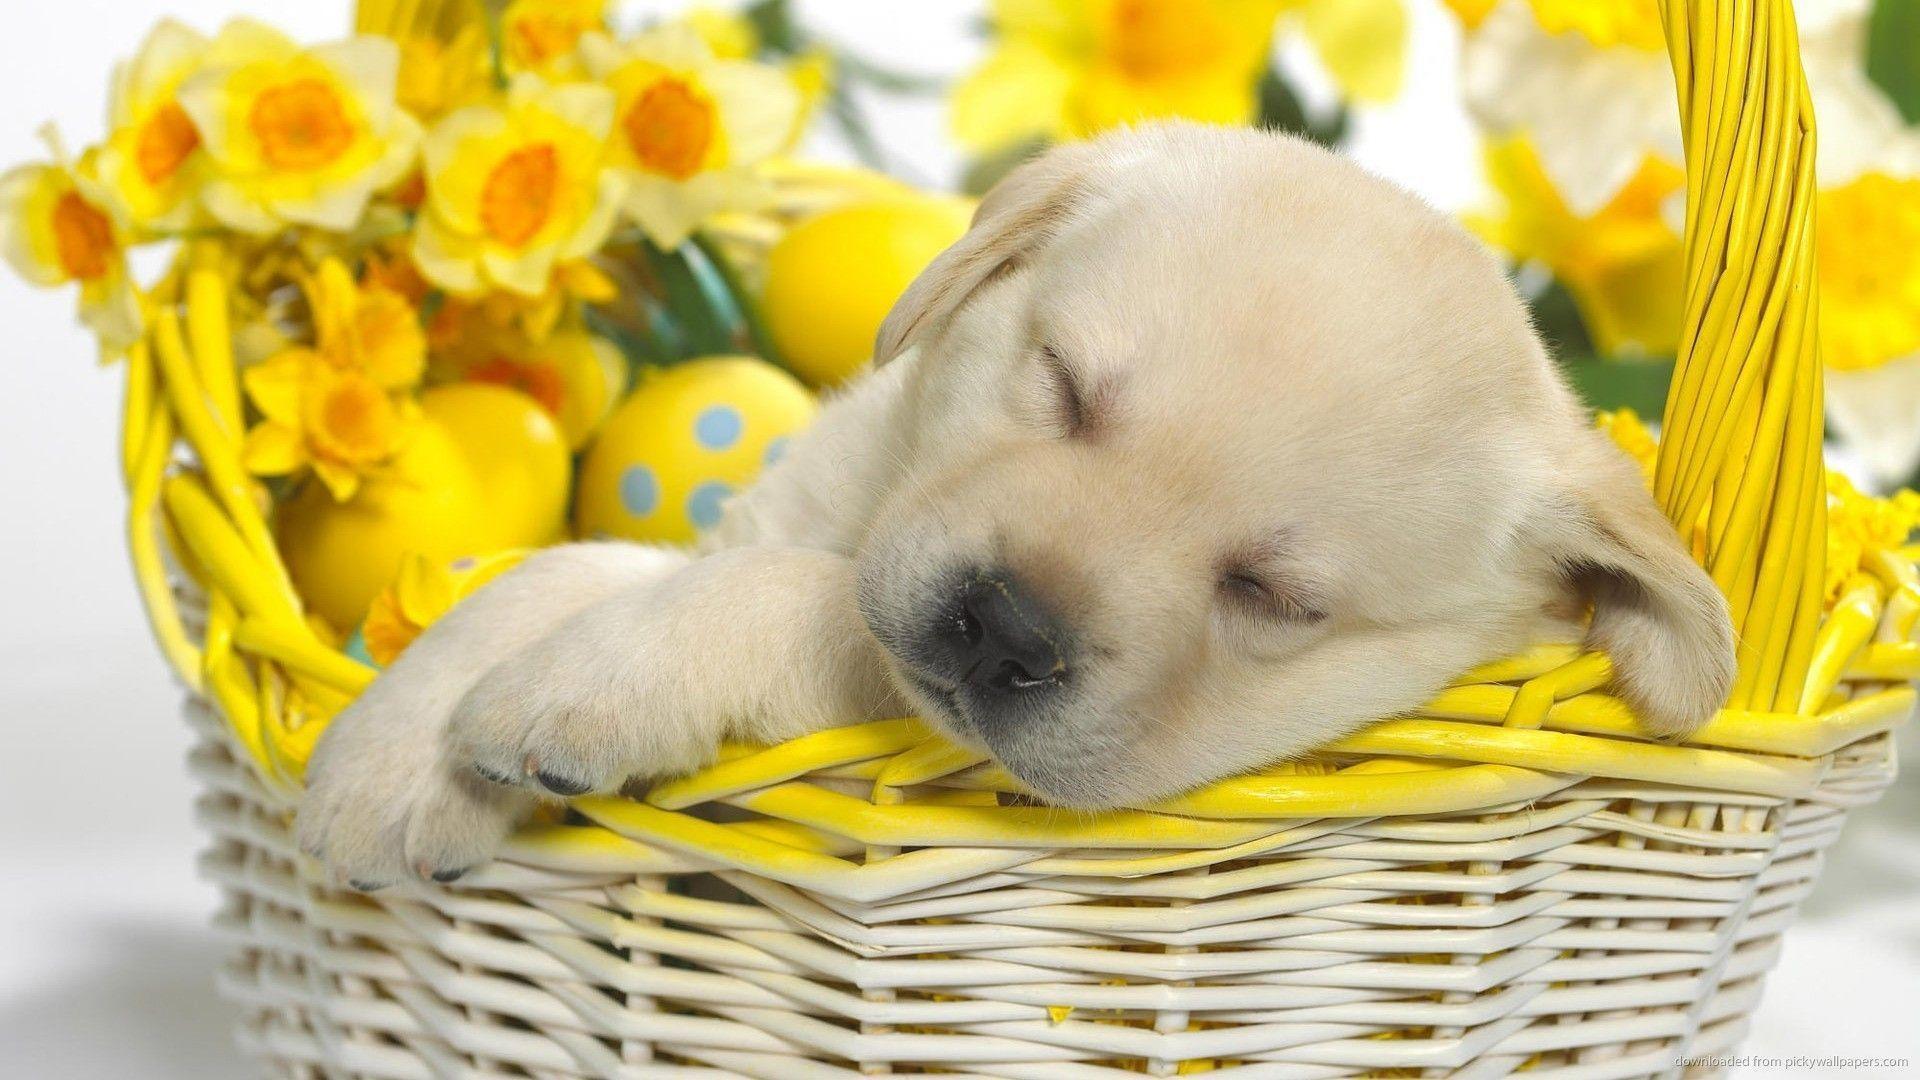 Cute Puppy Sleeping In An Easter Basket Wallpapers For Blackberry Curve